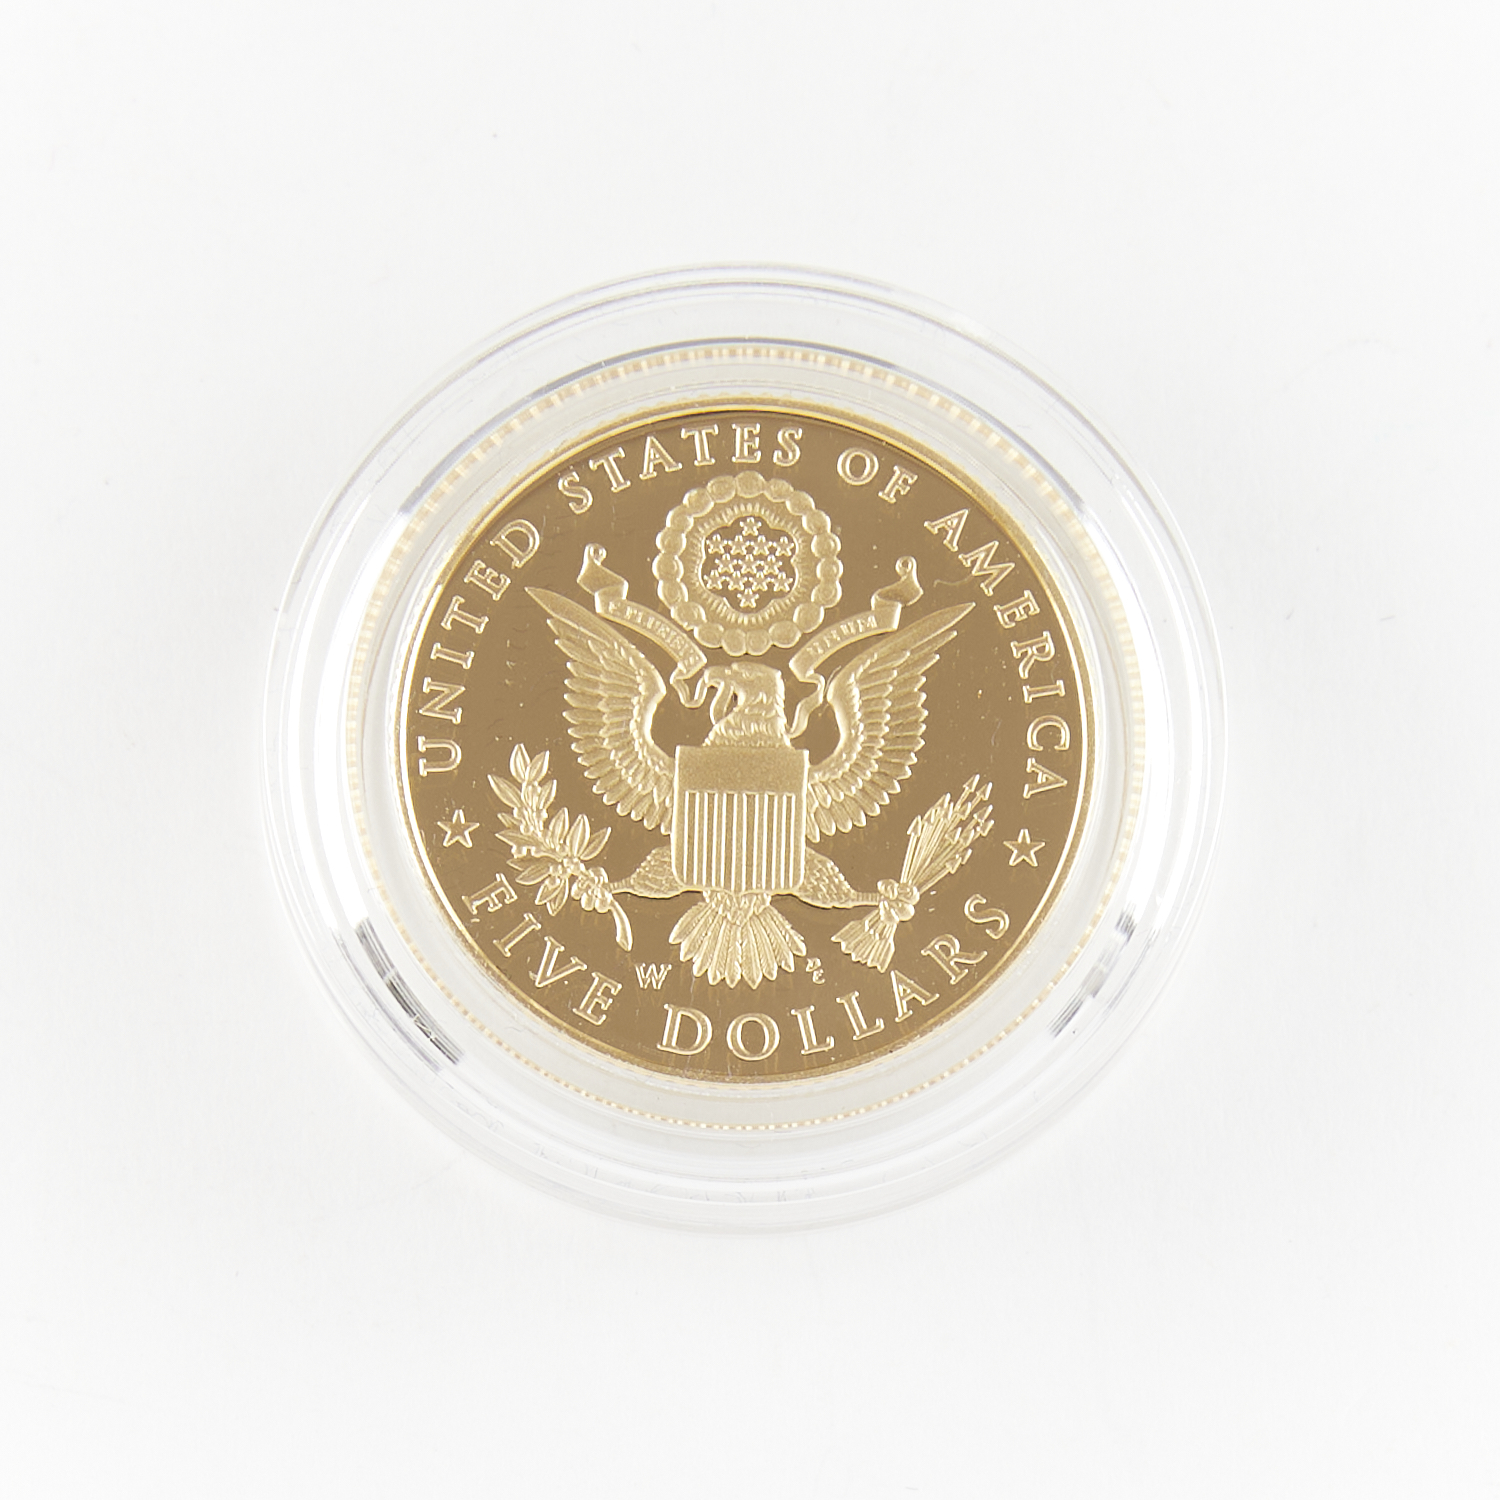 2008 $5 Gold American Eagle Proof Coin - Image 3 of 3